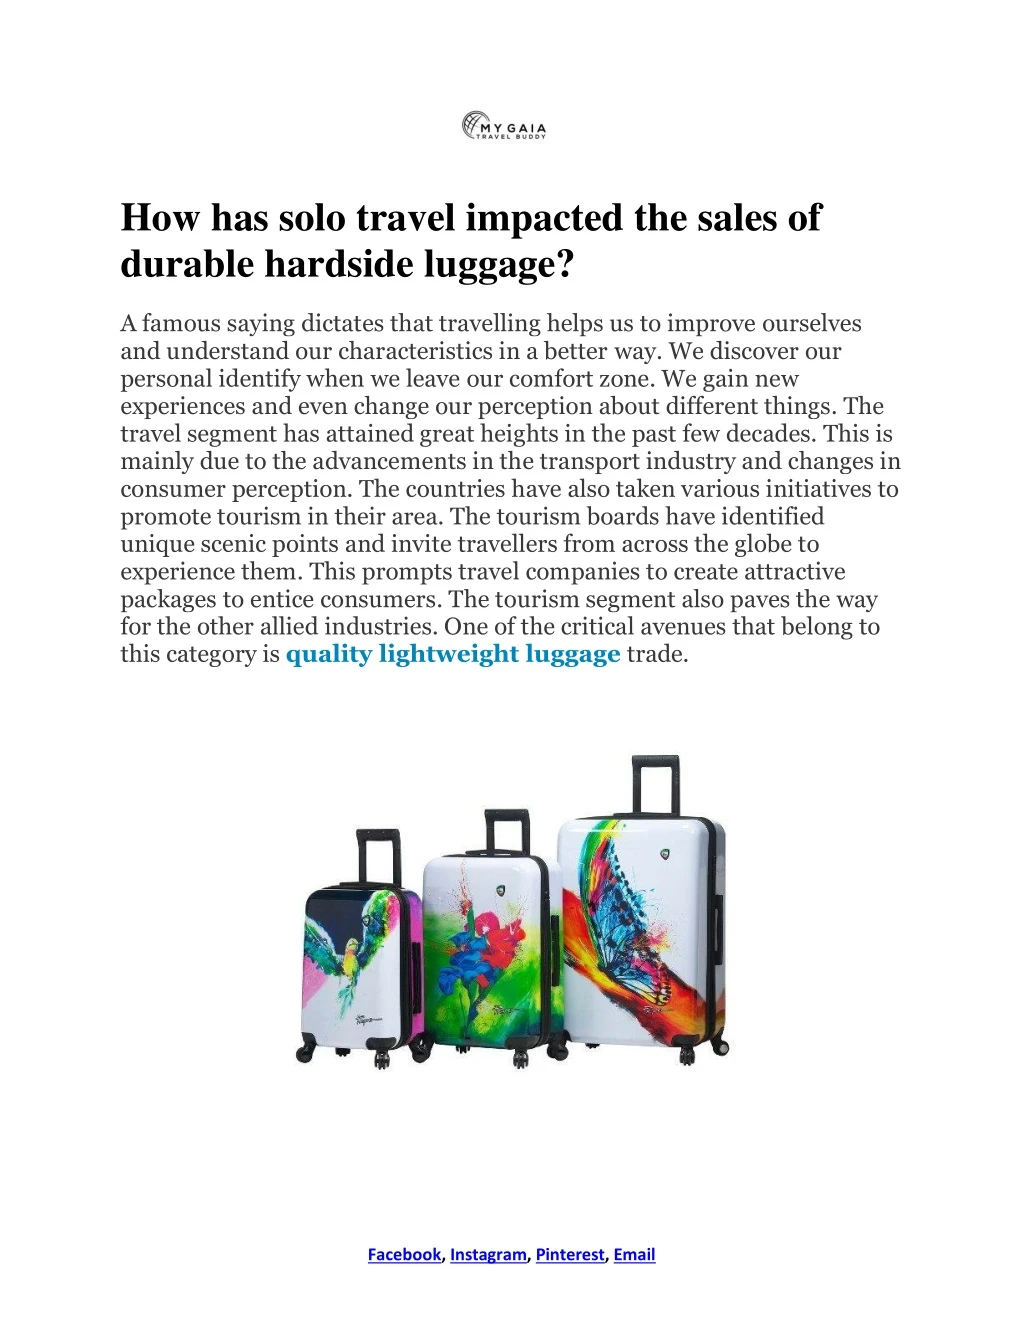 how has solo travel impacted the sales of durable